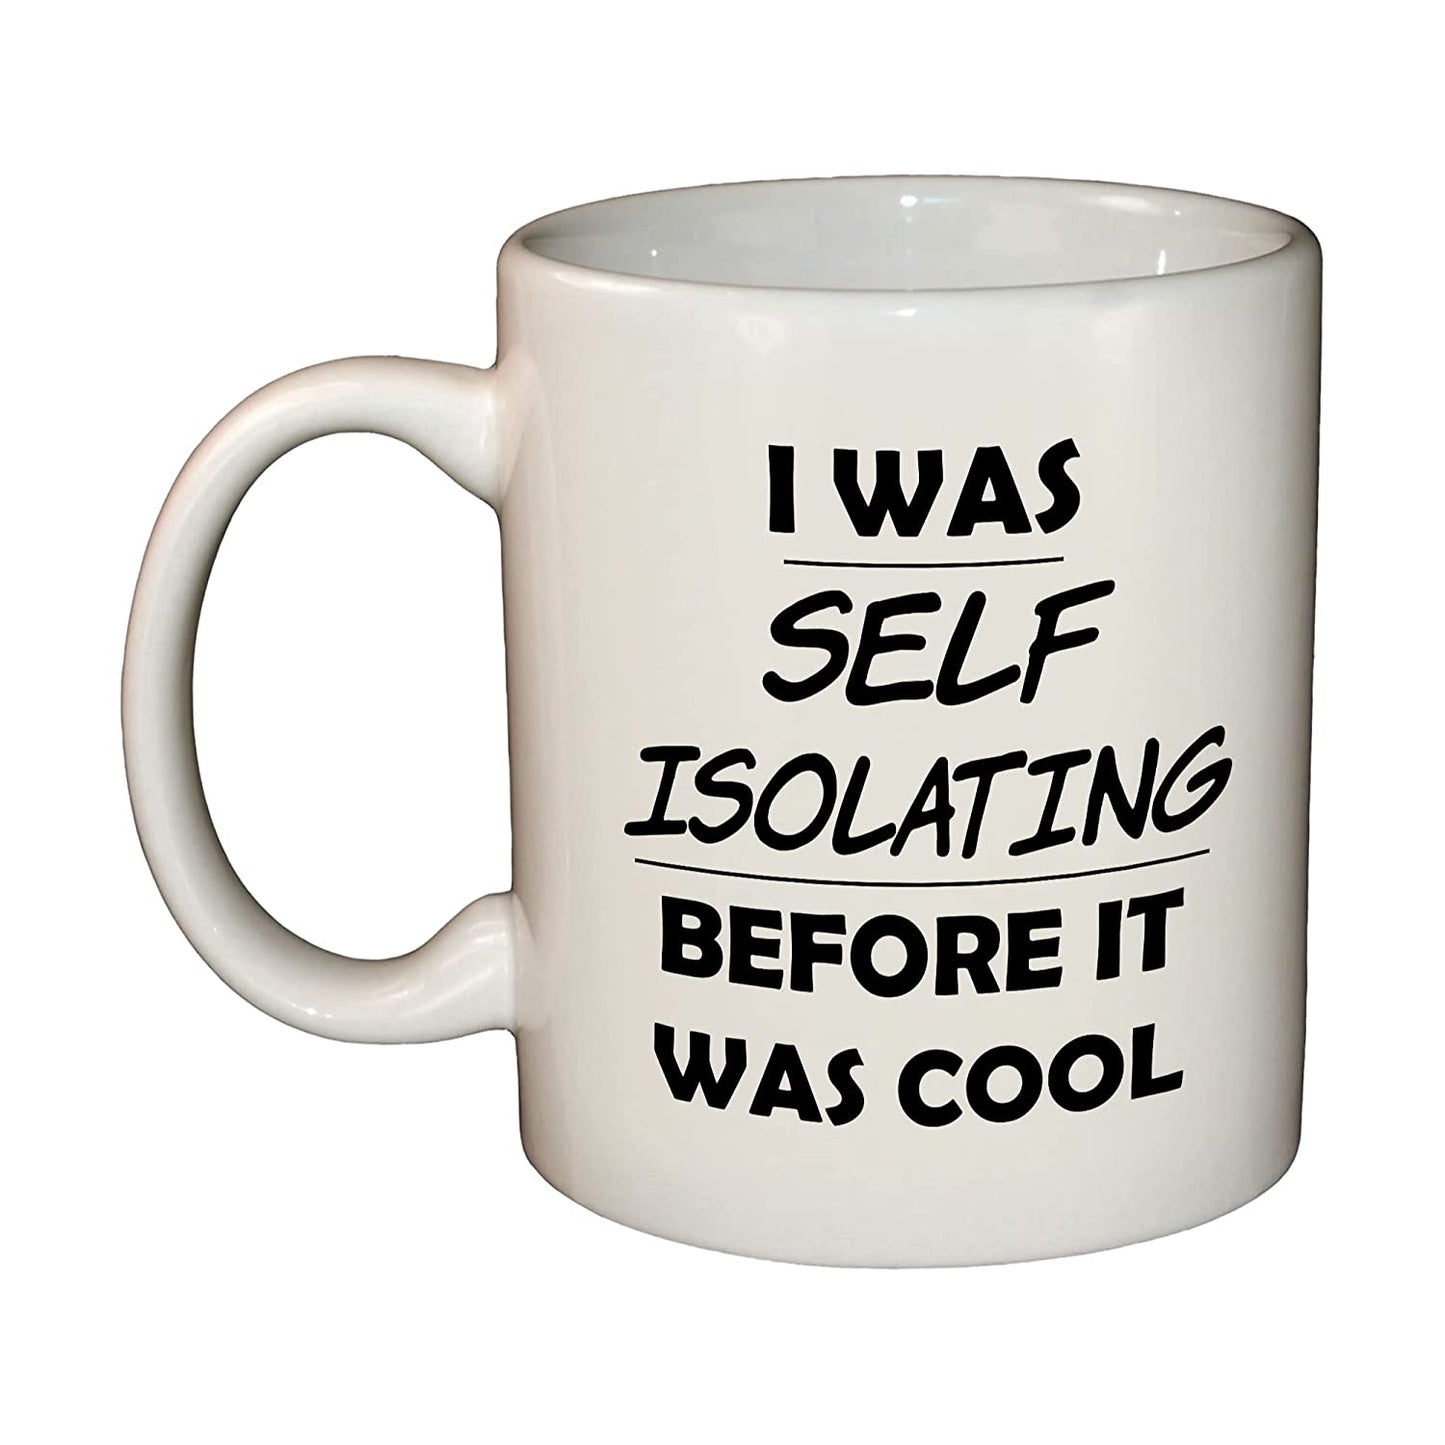 Self Isolating Before It was Cool Mug/Cup 11oz Dishwasher & Microwave safe